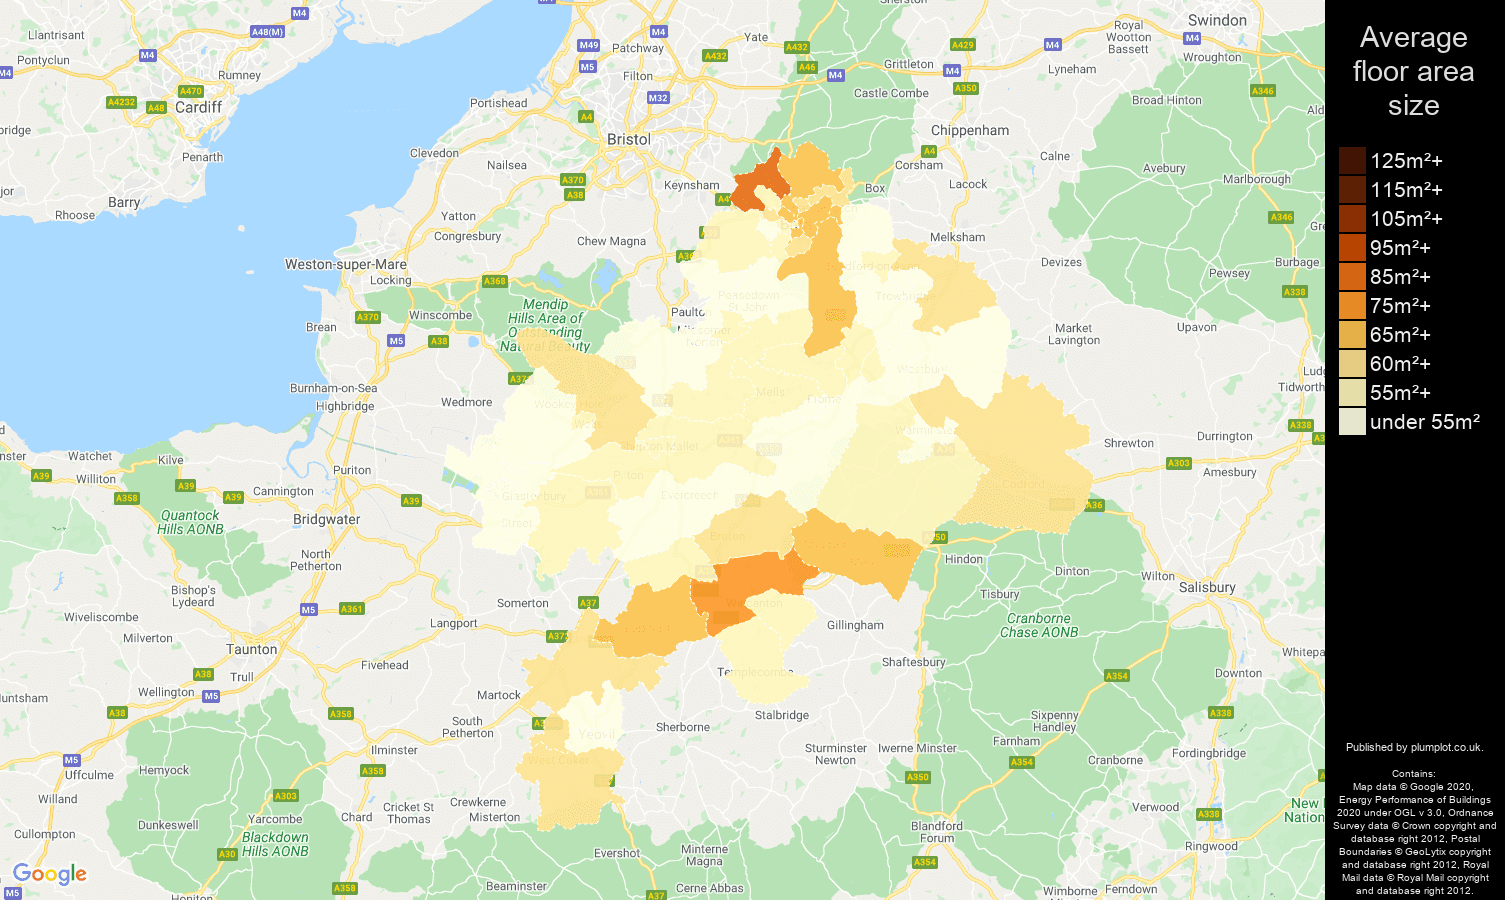 Bath map of average floor area size of flats